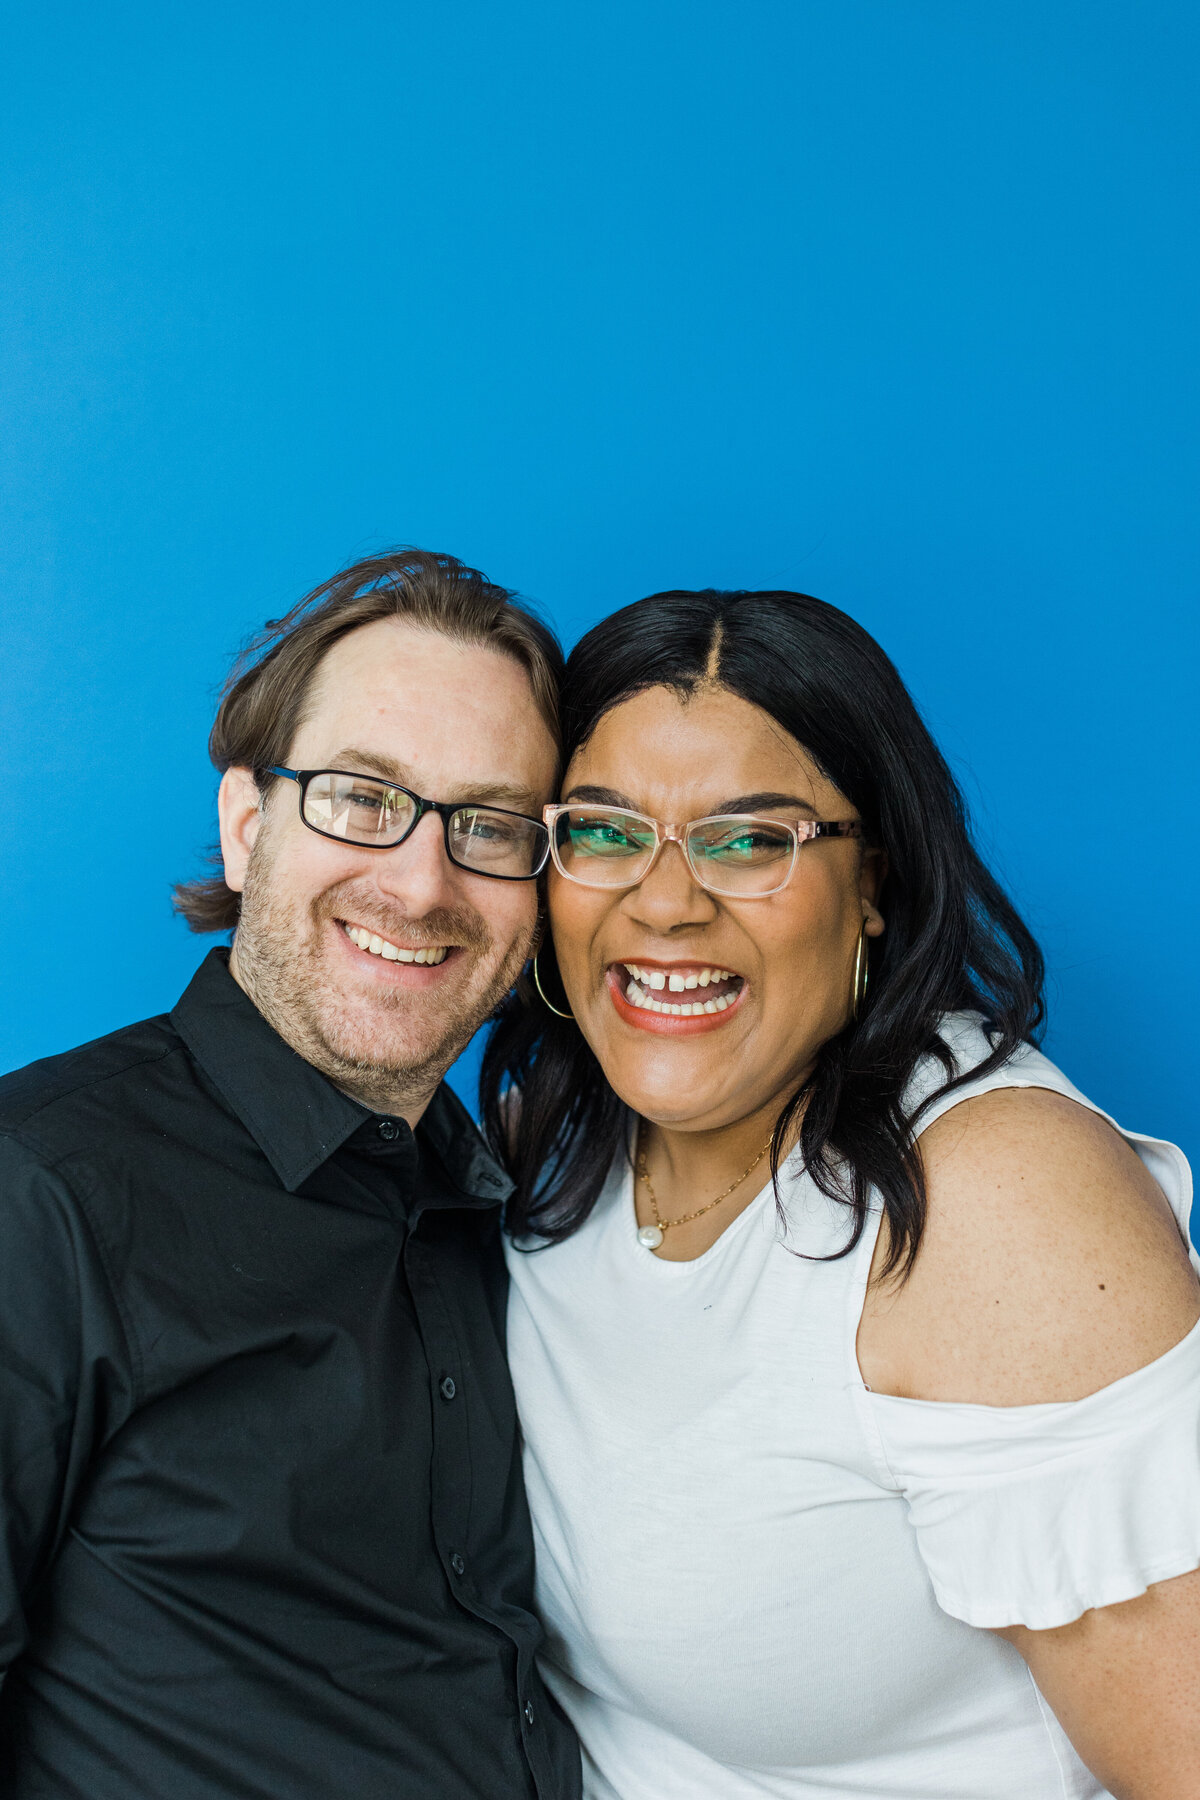 A couple joyfully smiling and posing with their faces touching in front of a blue background during their studio engagement session in Dallas, Texas. The woman on the right is wearing a white top and glasses while the man on the left is wearing a black dress shirt and glasses.